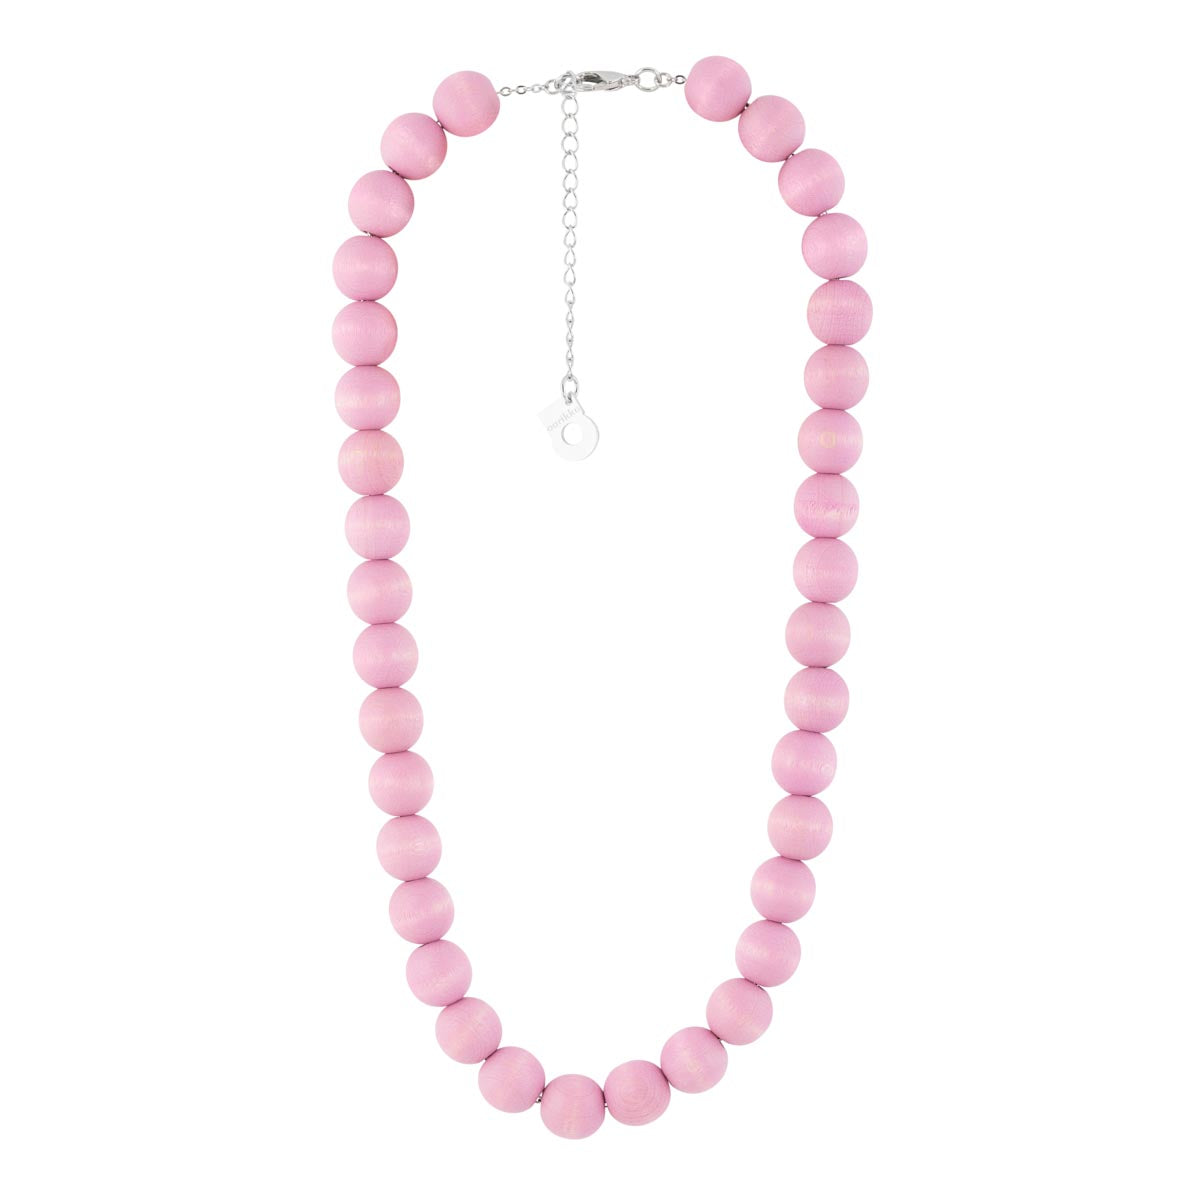 Aito necklace, light pink